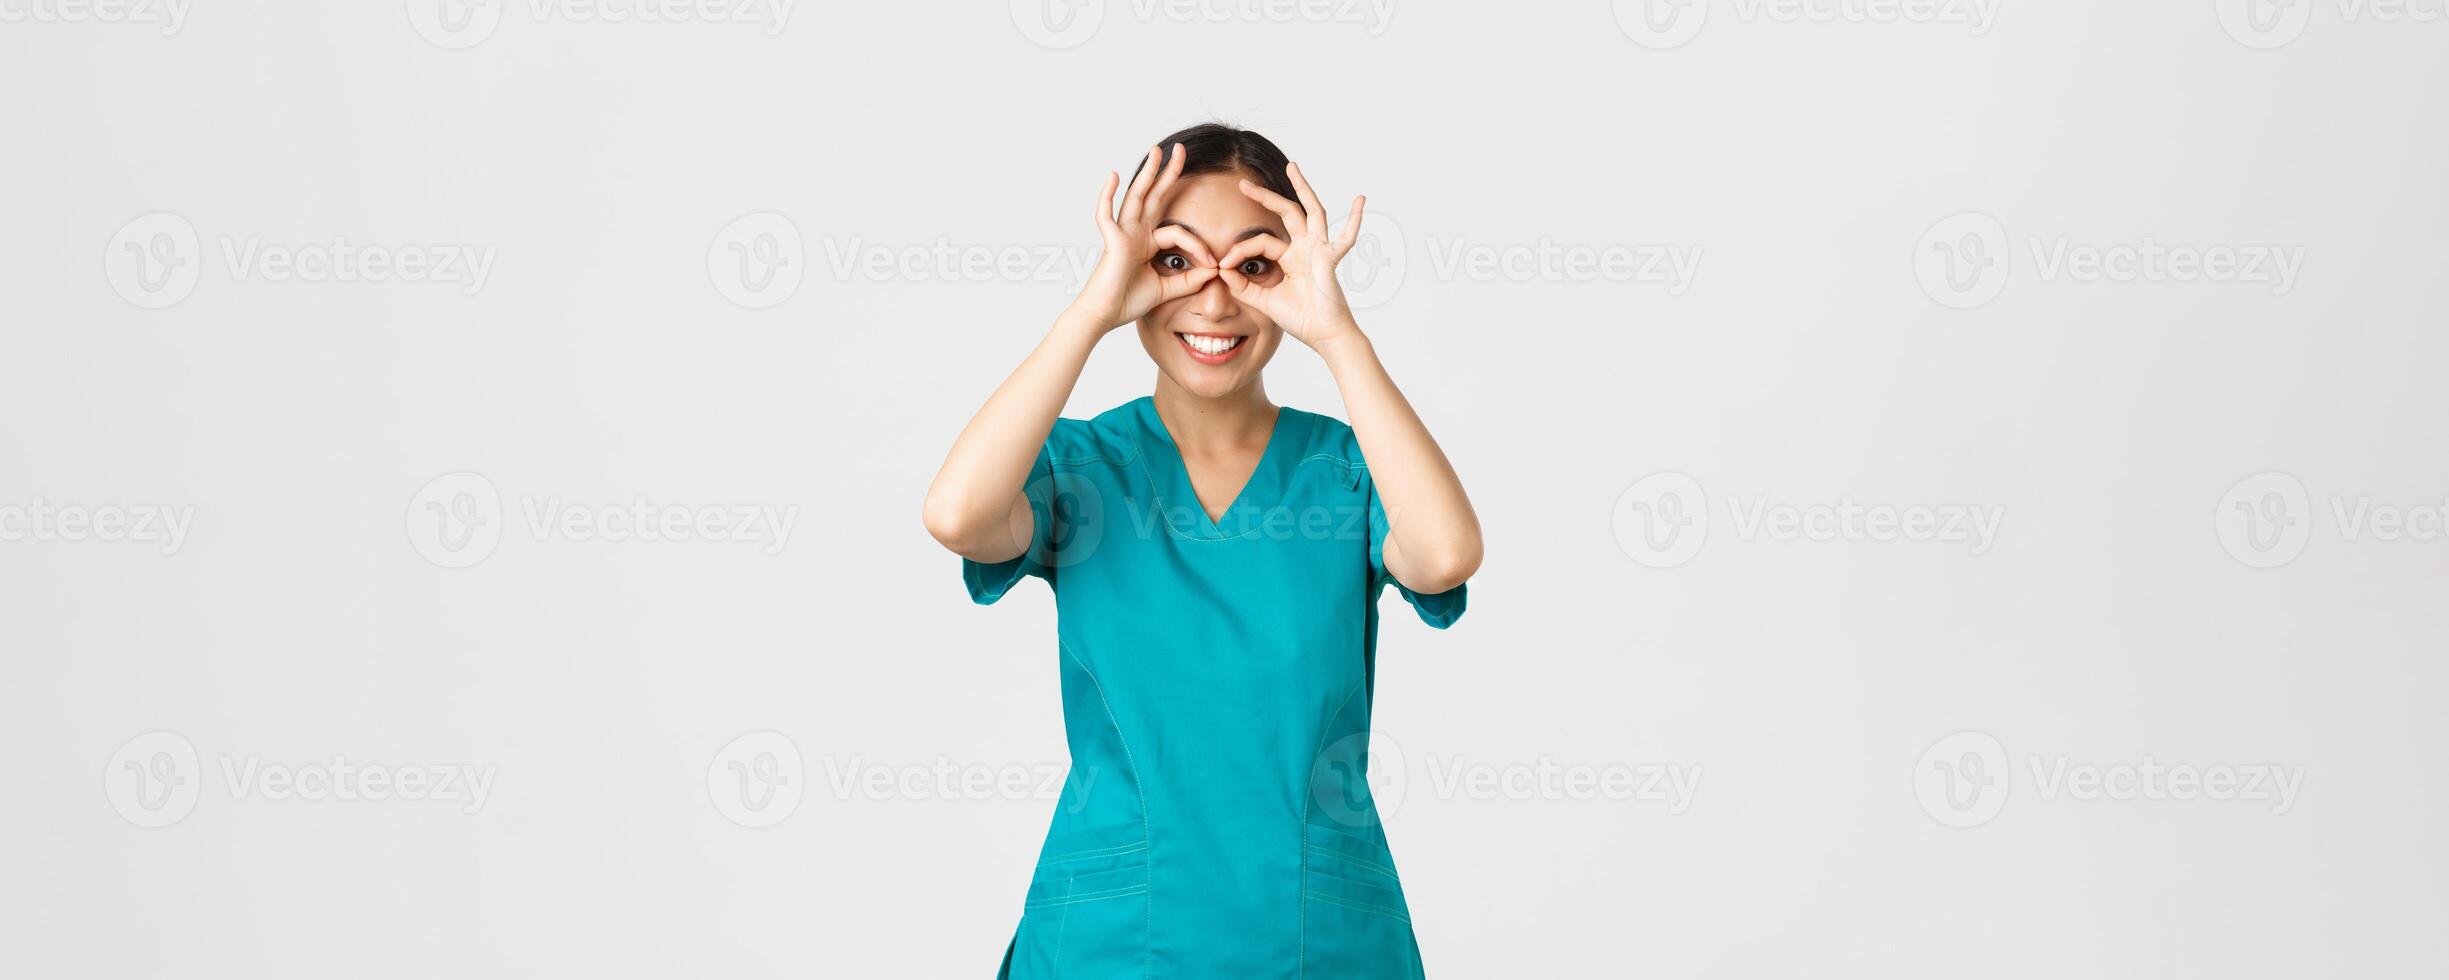 Covid-19, healthcare workers and preventing virus concept. Amused happy, cute asian female doctor, intern in scrubs looking through hand binoculars with excited expression, smiling photo